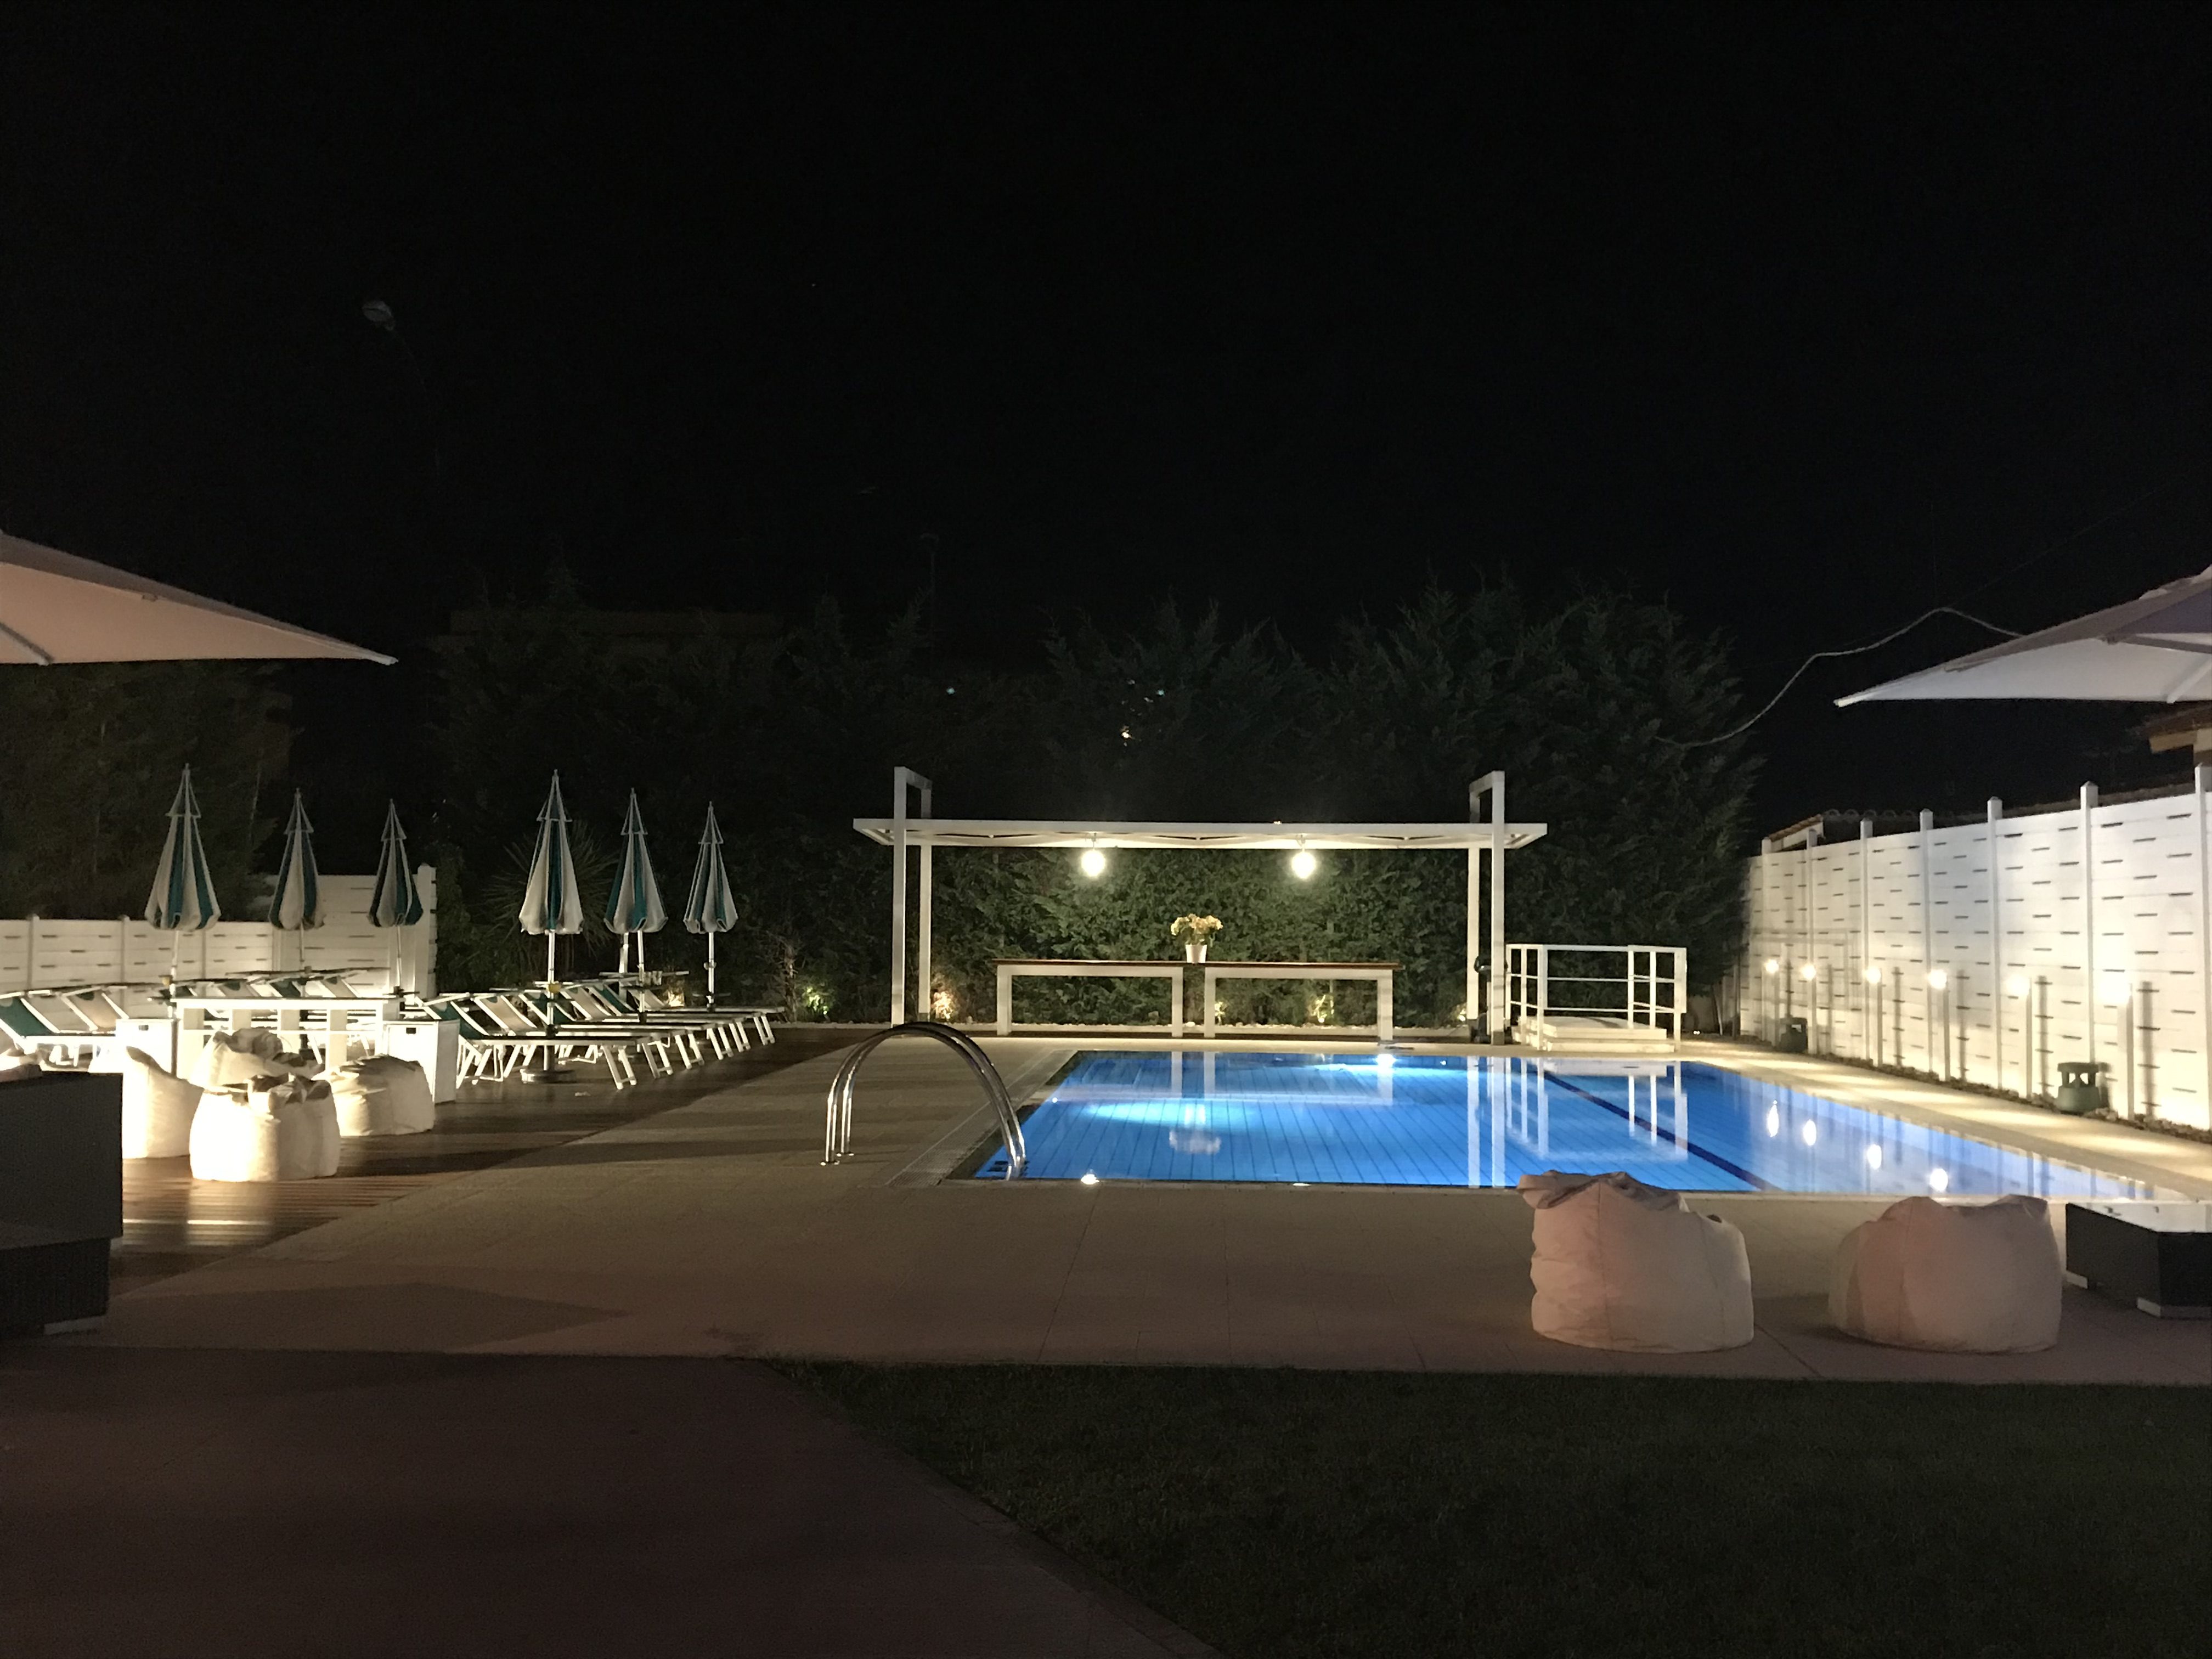 a pool with umbrellas and chairs at night